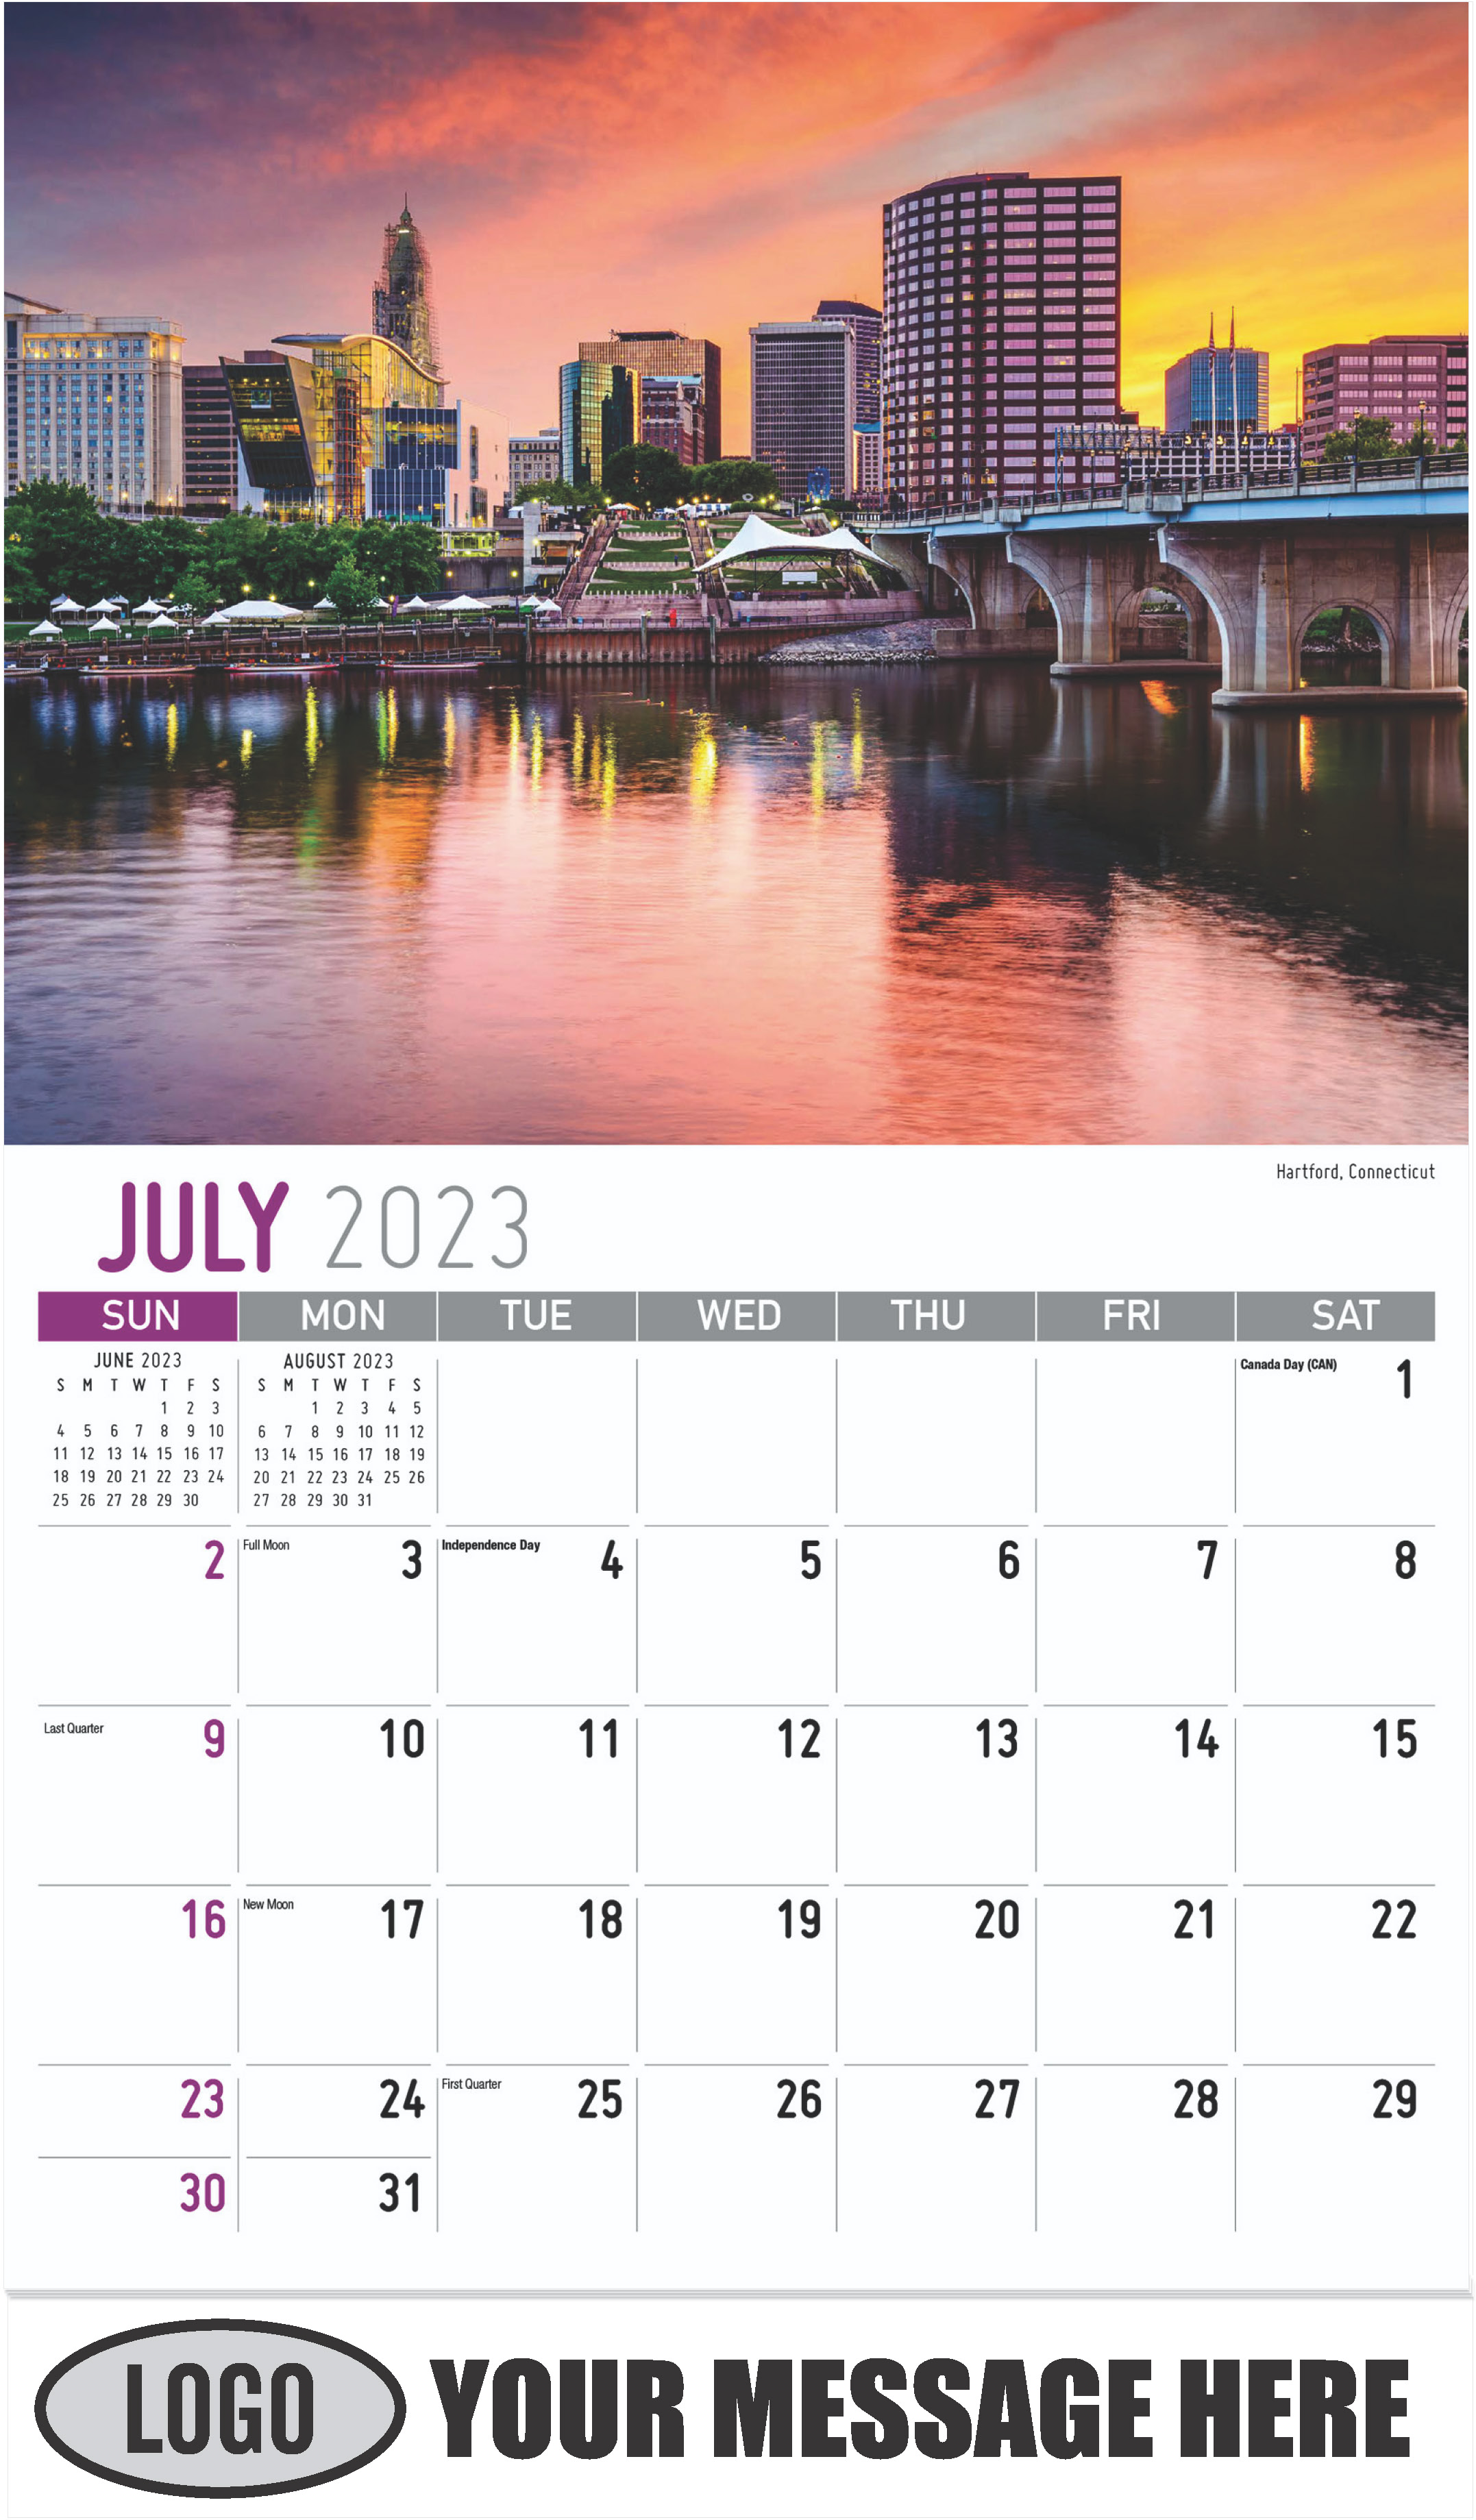 Hartford, Connecticut - July - Scenes of New England 2023 Promotional Calendar